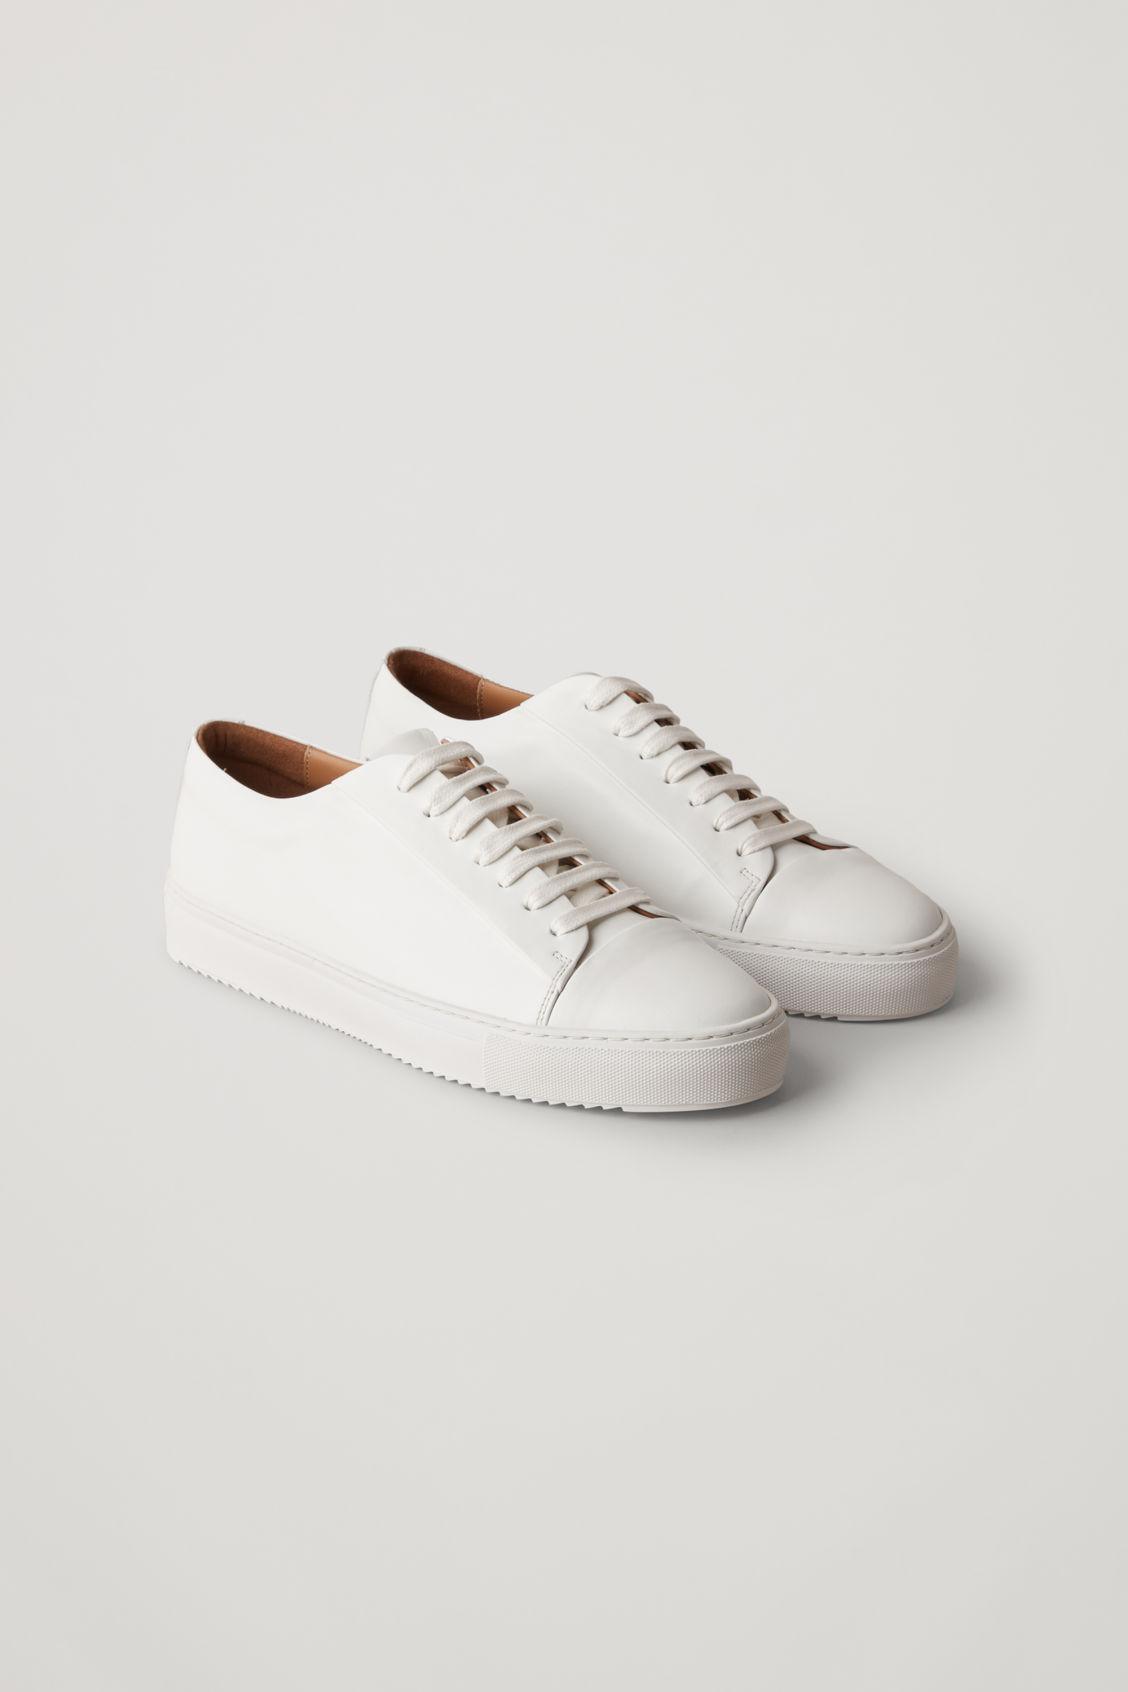 COS Thick-soled Leather Sneakers in White for Men | Lyst